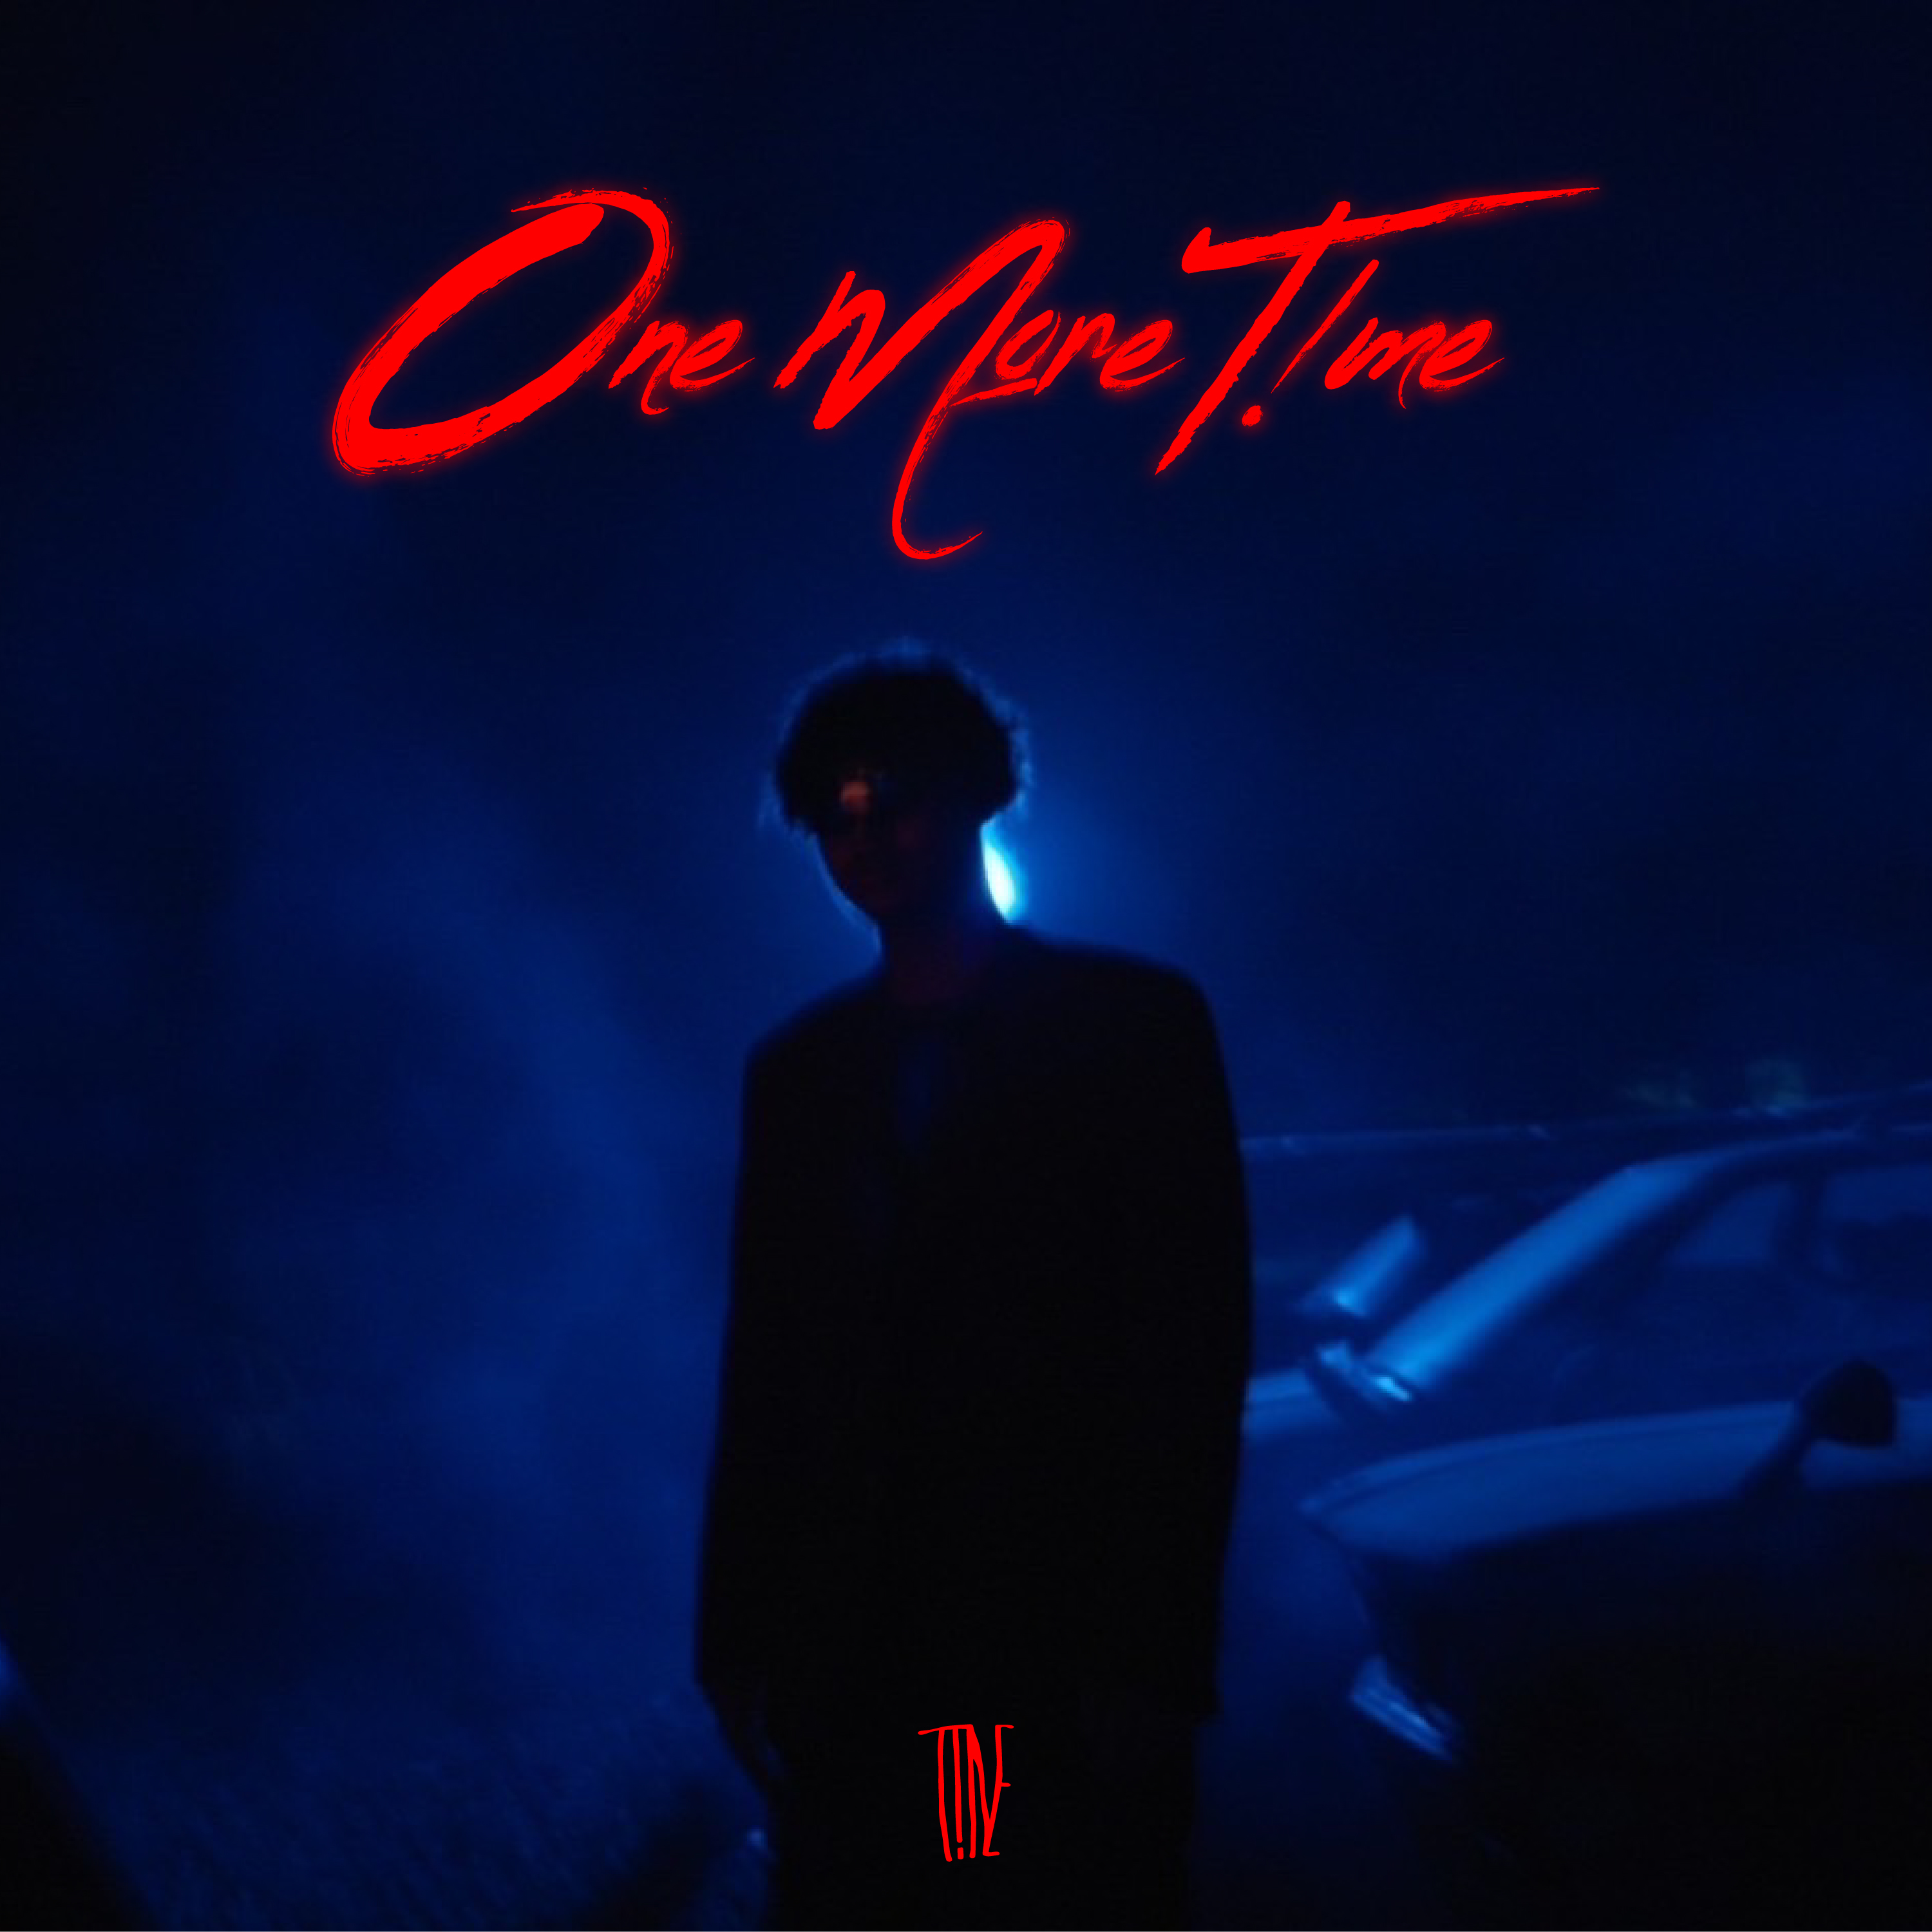 T!NE – One More Time